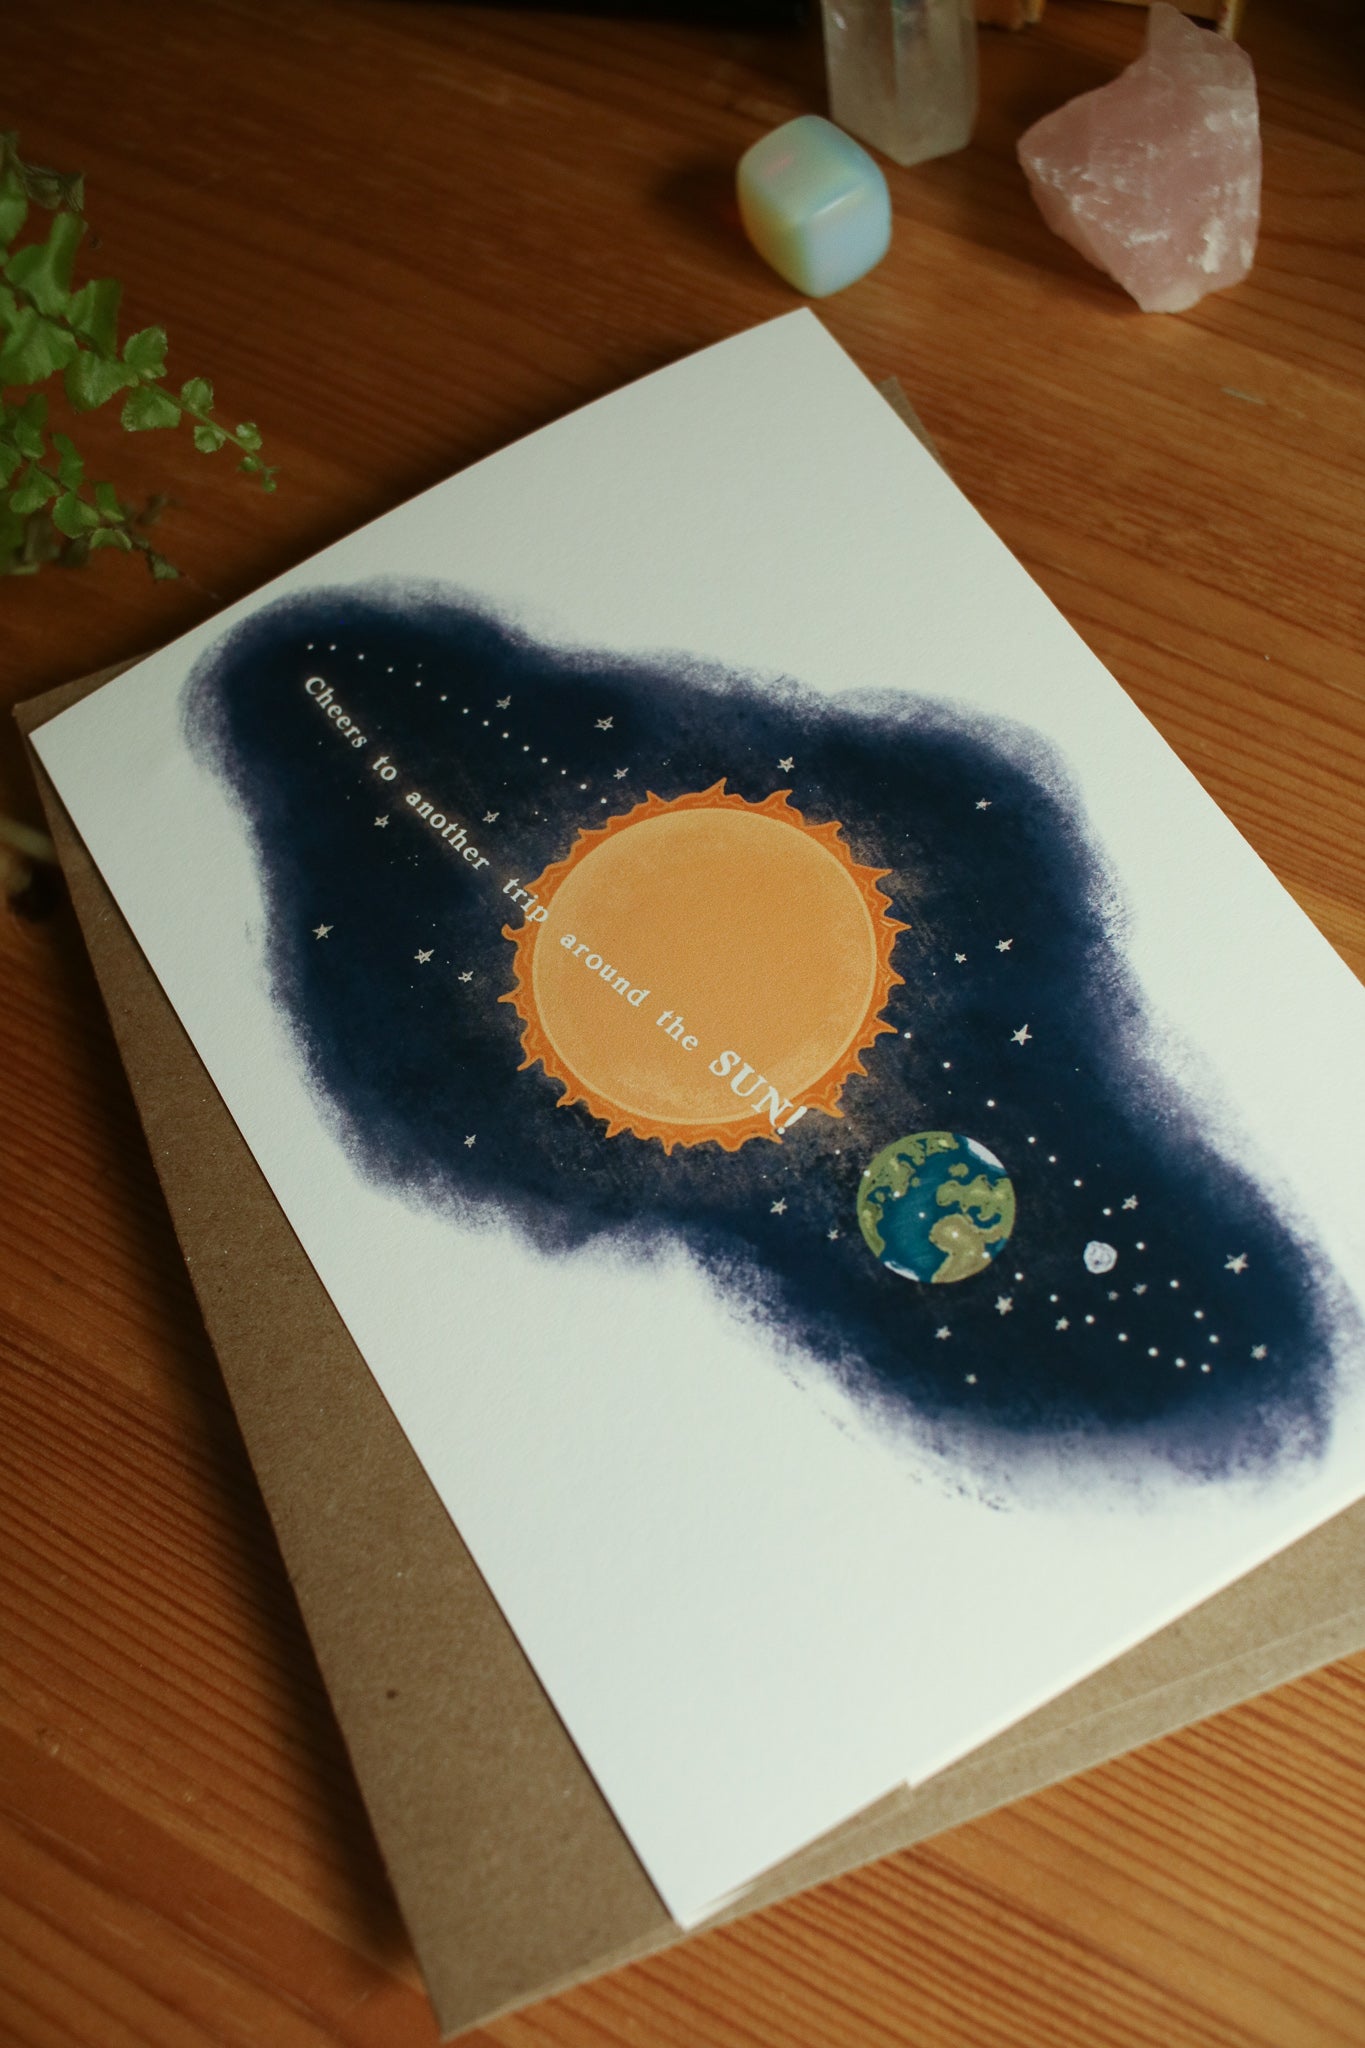 Cheers to Another Trip Around the Sun - Greeting Card